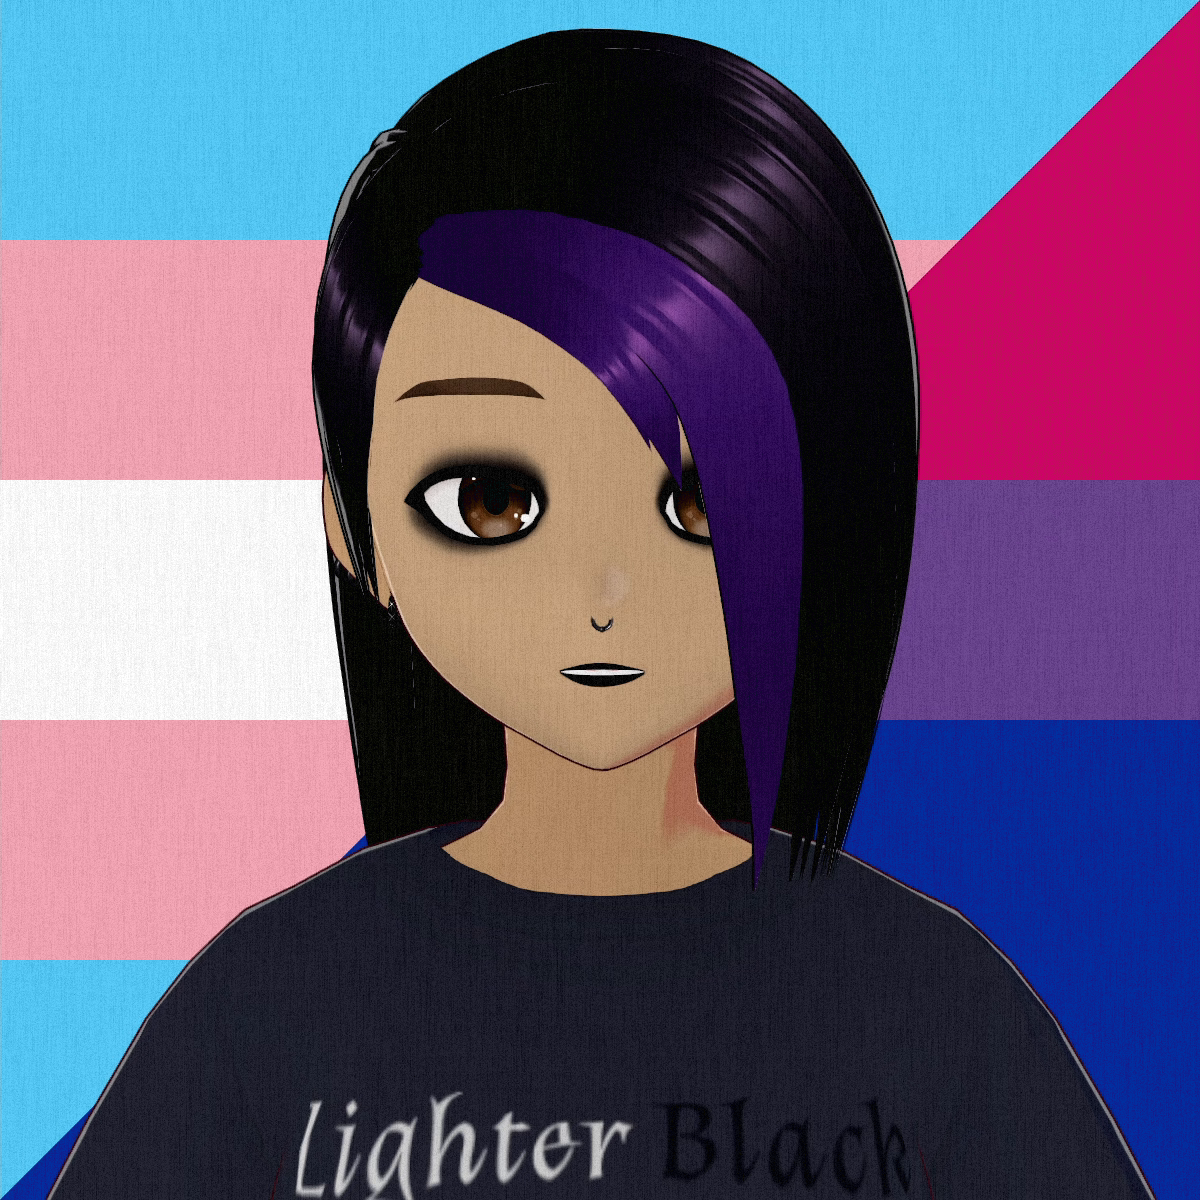 Lucy - medium-light skin-tone girl with emo over-her-left-eye dark-purple hair with a bright purple streak. 
  Her makeup is thick black eyeliner & lipstick. 
  She has a nosering and various ear piercings. 
  She's wearing a Lighter Black T-shirt. 
  She's staring straight at you. 
  The background is a diagonal split between the transgender and bisexual flags. 
  There is a very intense filmgrain over the image.